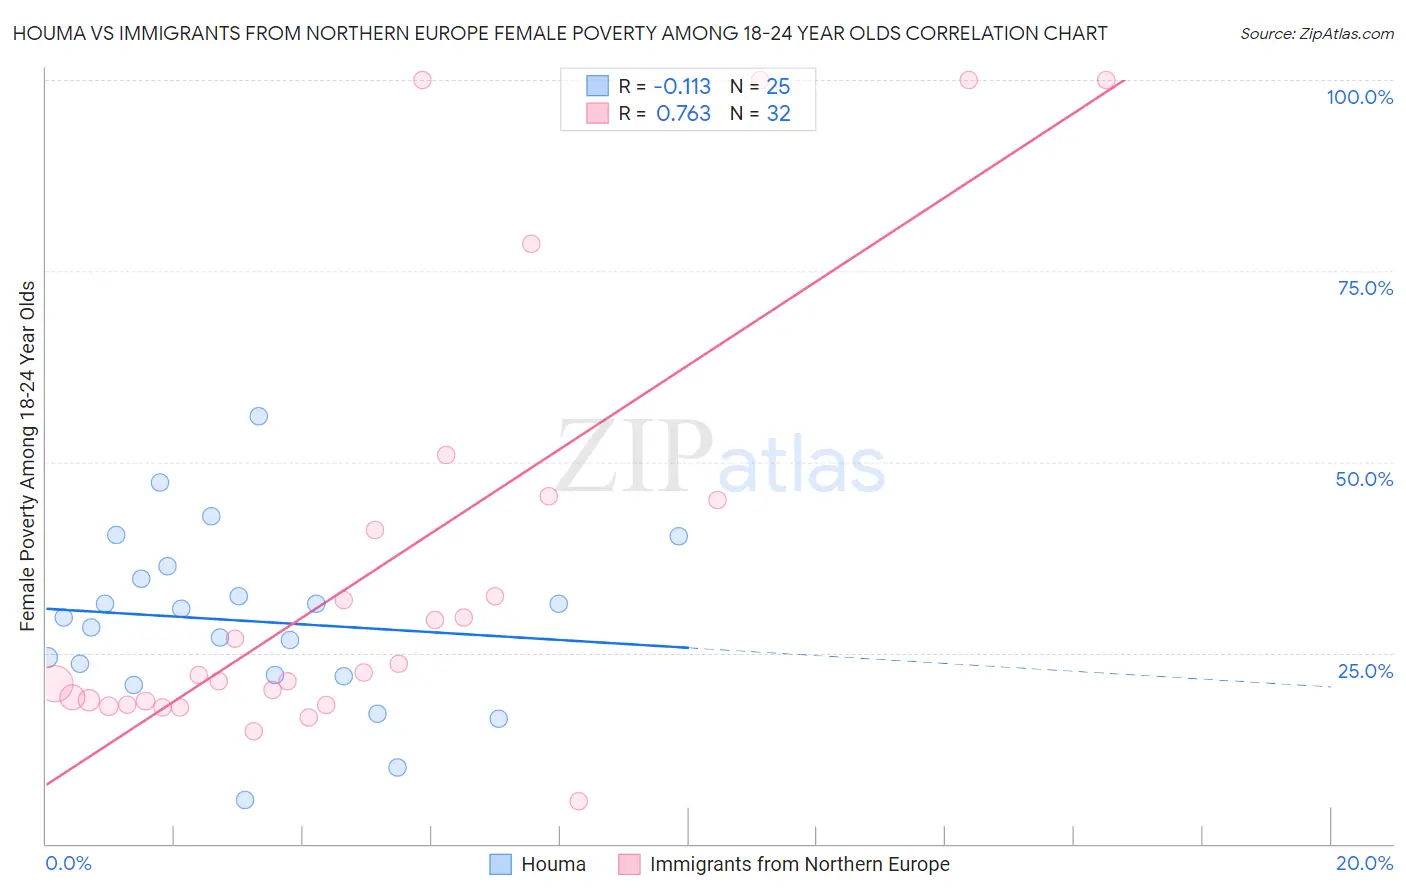 Houma vs Immigrants from Northern Europe Female Poverty Among 18-24 Year Olds